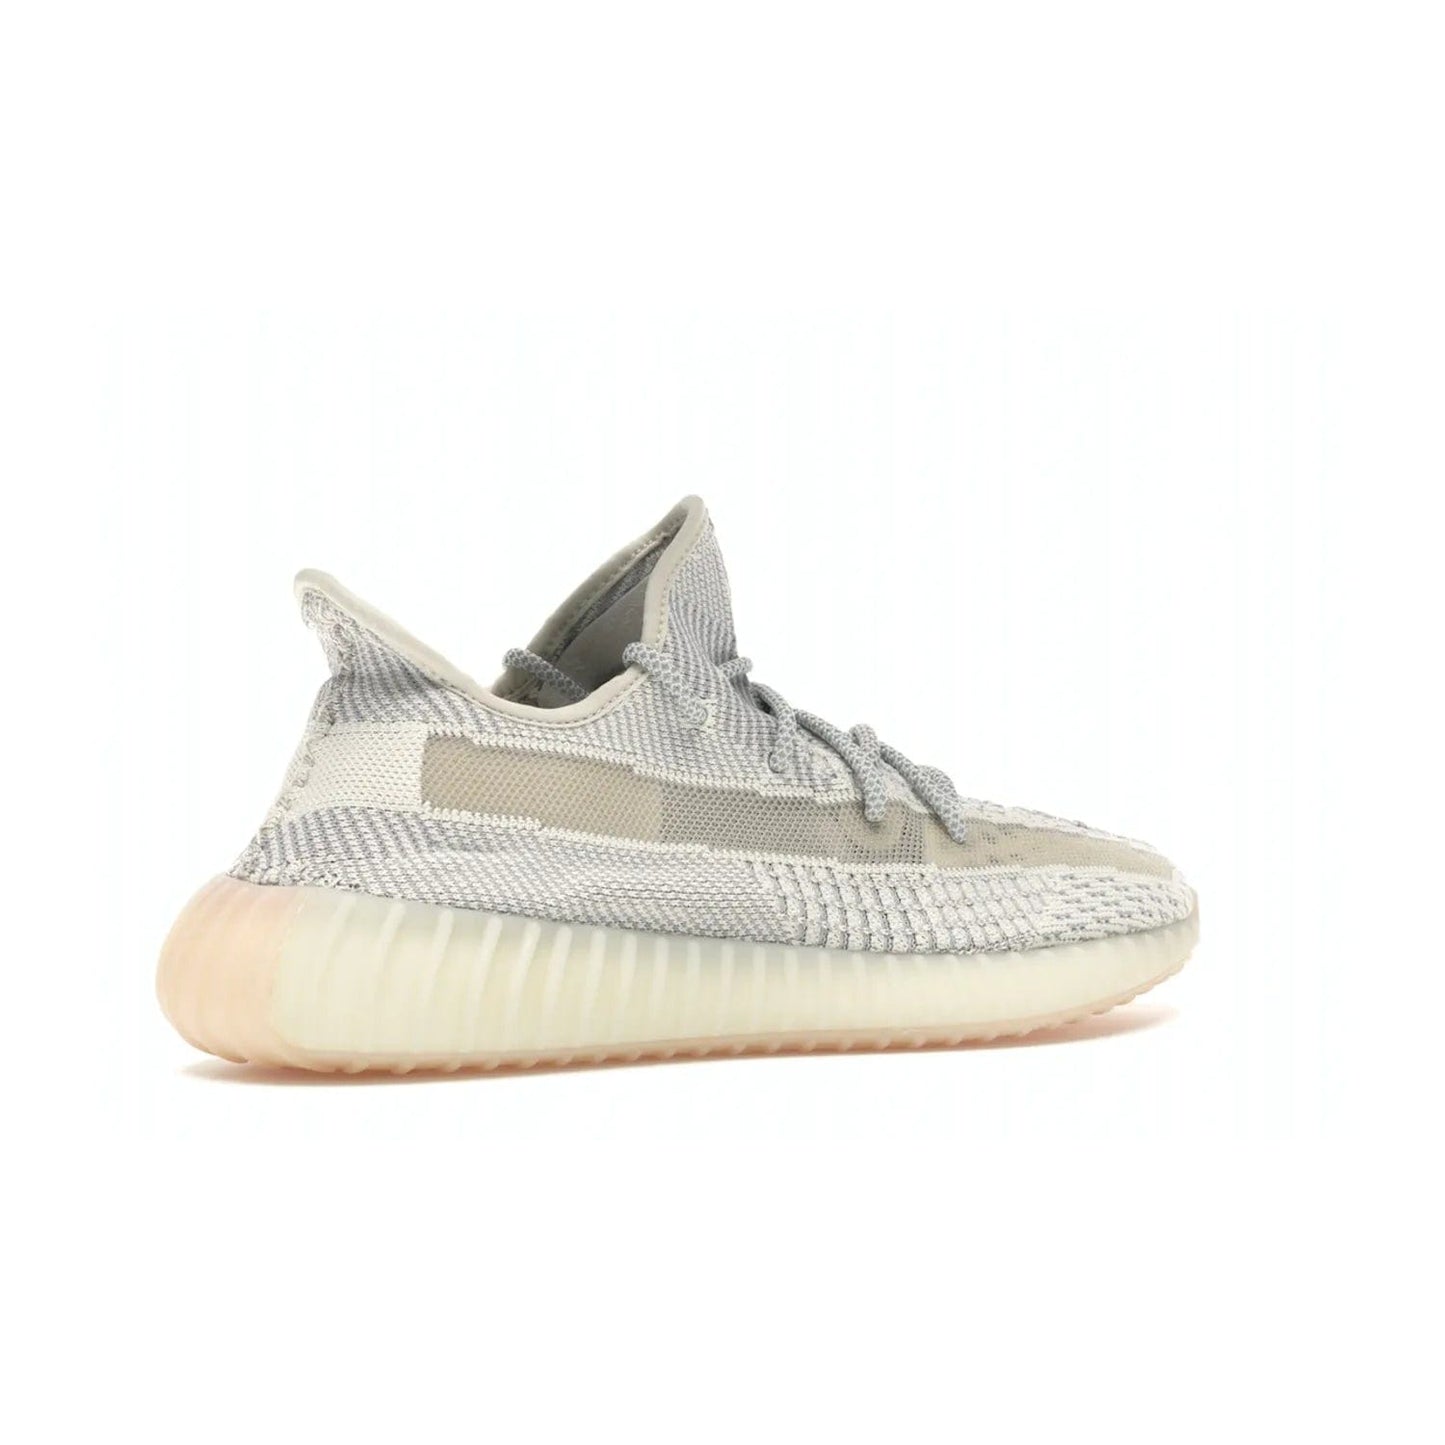 adidas Yeezy Boost 350 V2 Lundmark (Non Reflective) - Image 34 - Only at www.BallersClubKickz.com - Shop the exclusive adidas Yeezy Boost 350 V2 Lundmark with a subtle summer color, mesh upper, white-to-cream transitional midsole, light tan outsole, and pink middle stripe. Comfort and style come together in this perfect summer 350 V2. Released on July 11, 2019.